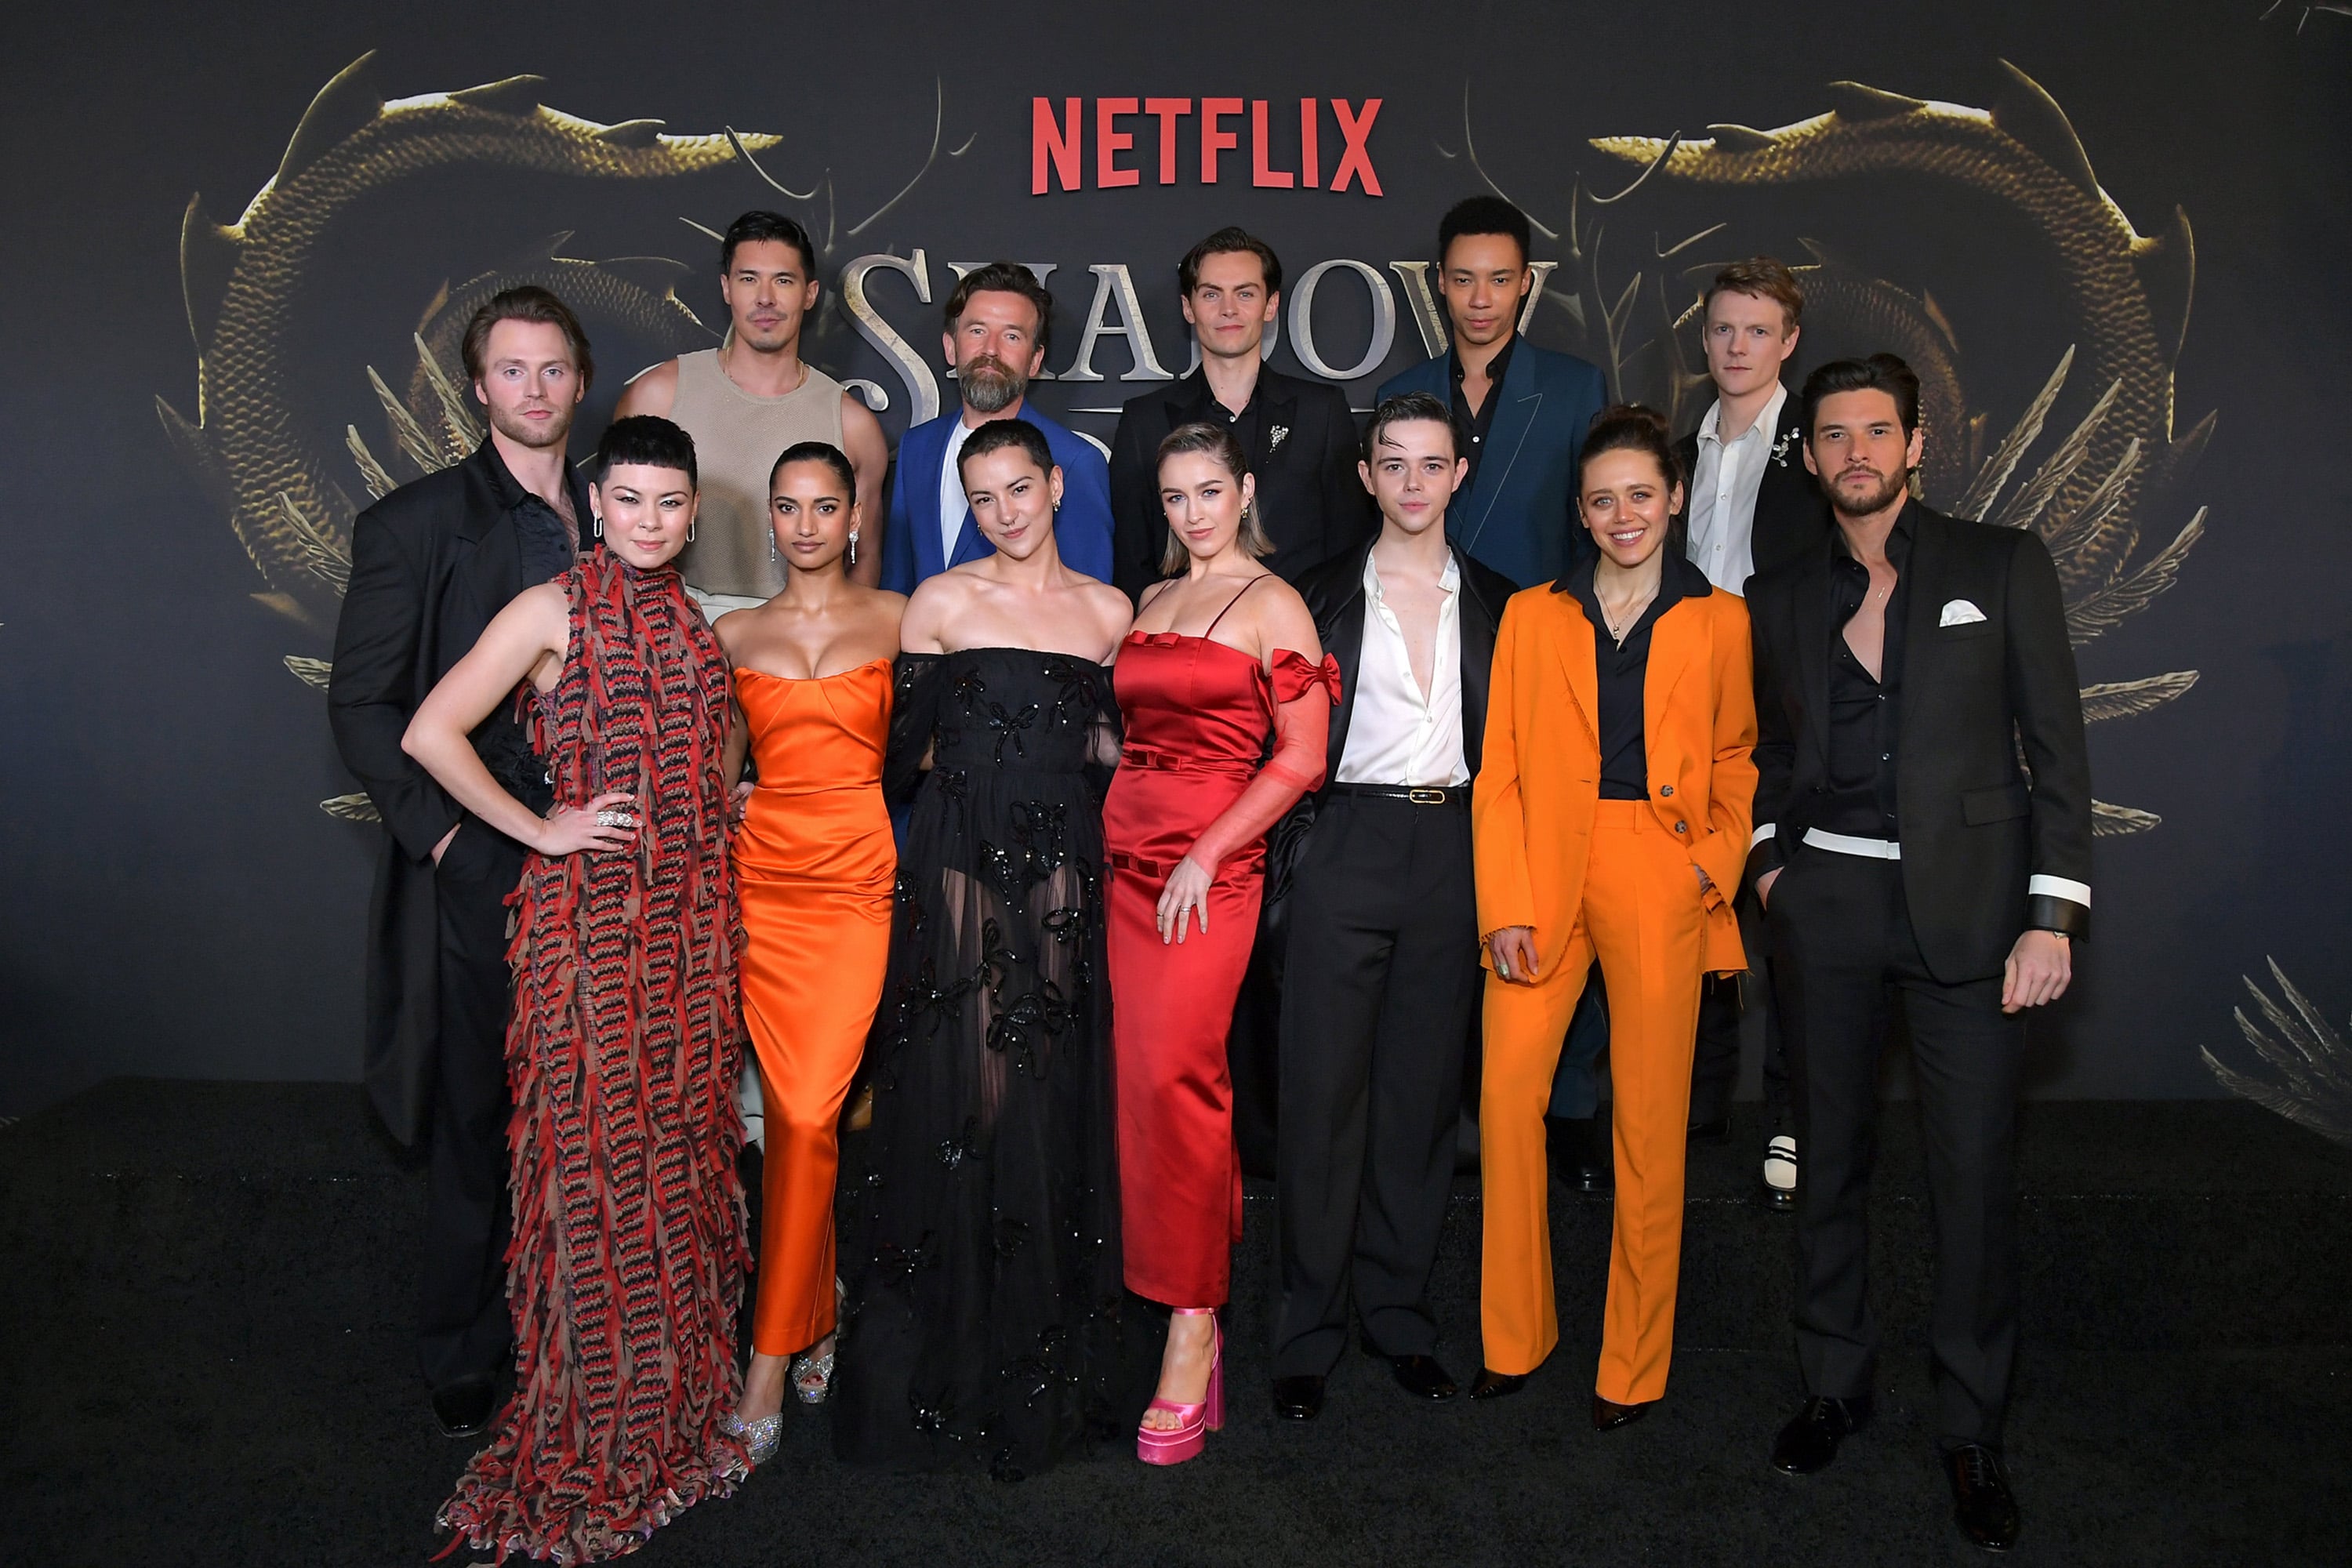 Netflix's Shadow and Bone Cast: Meet the Characters and Who